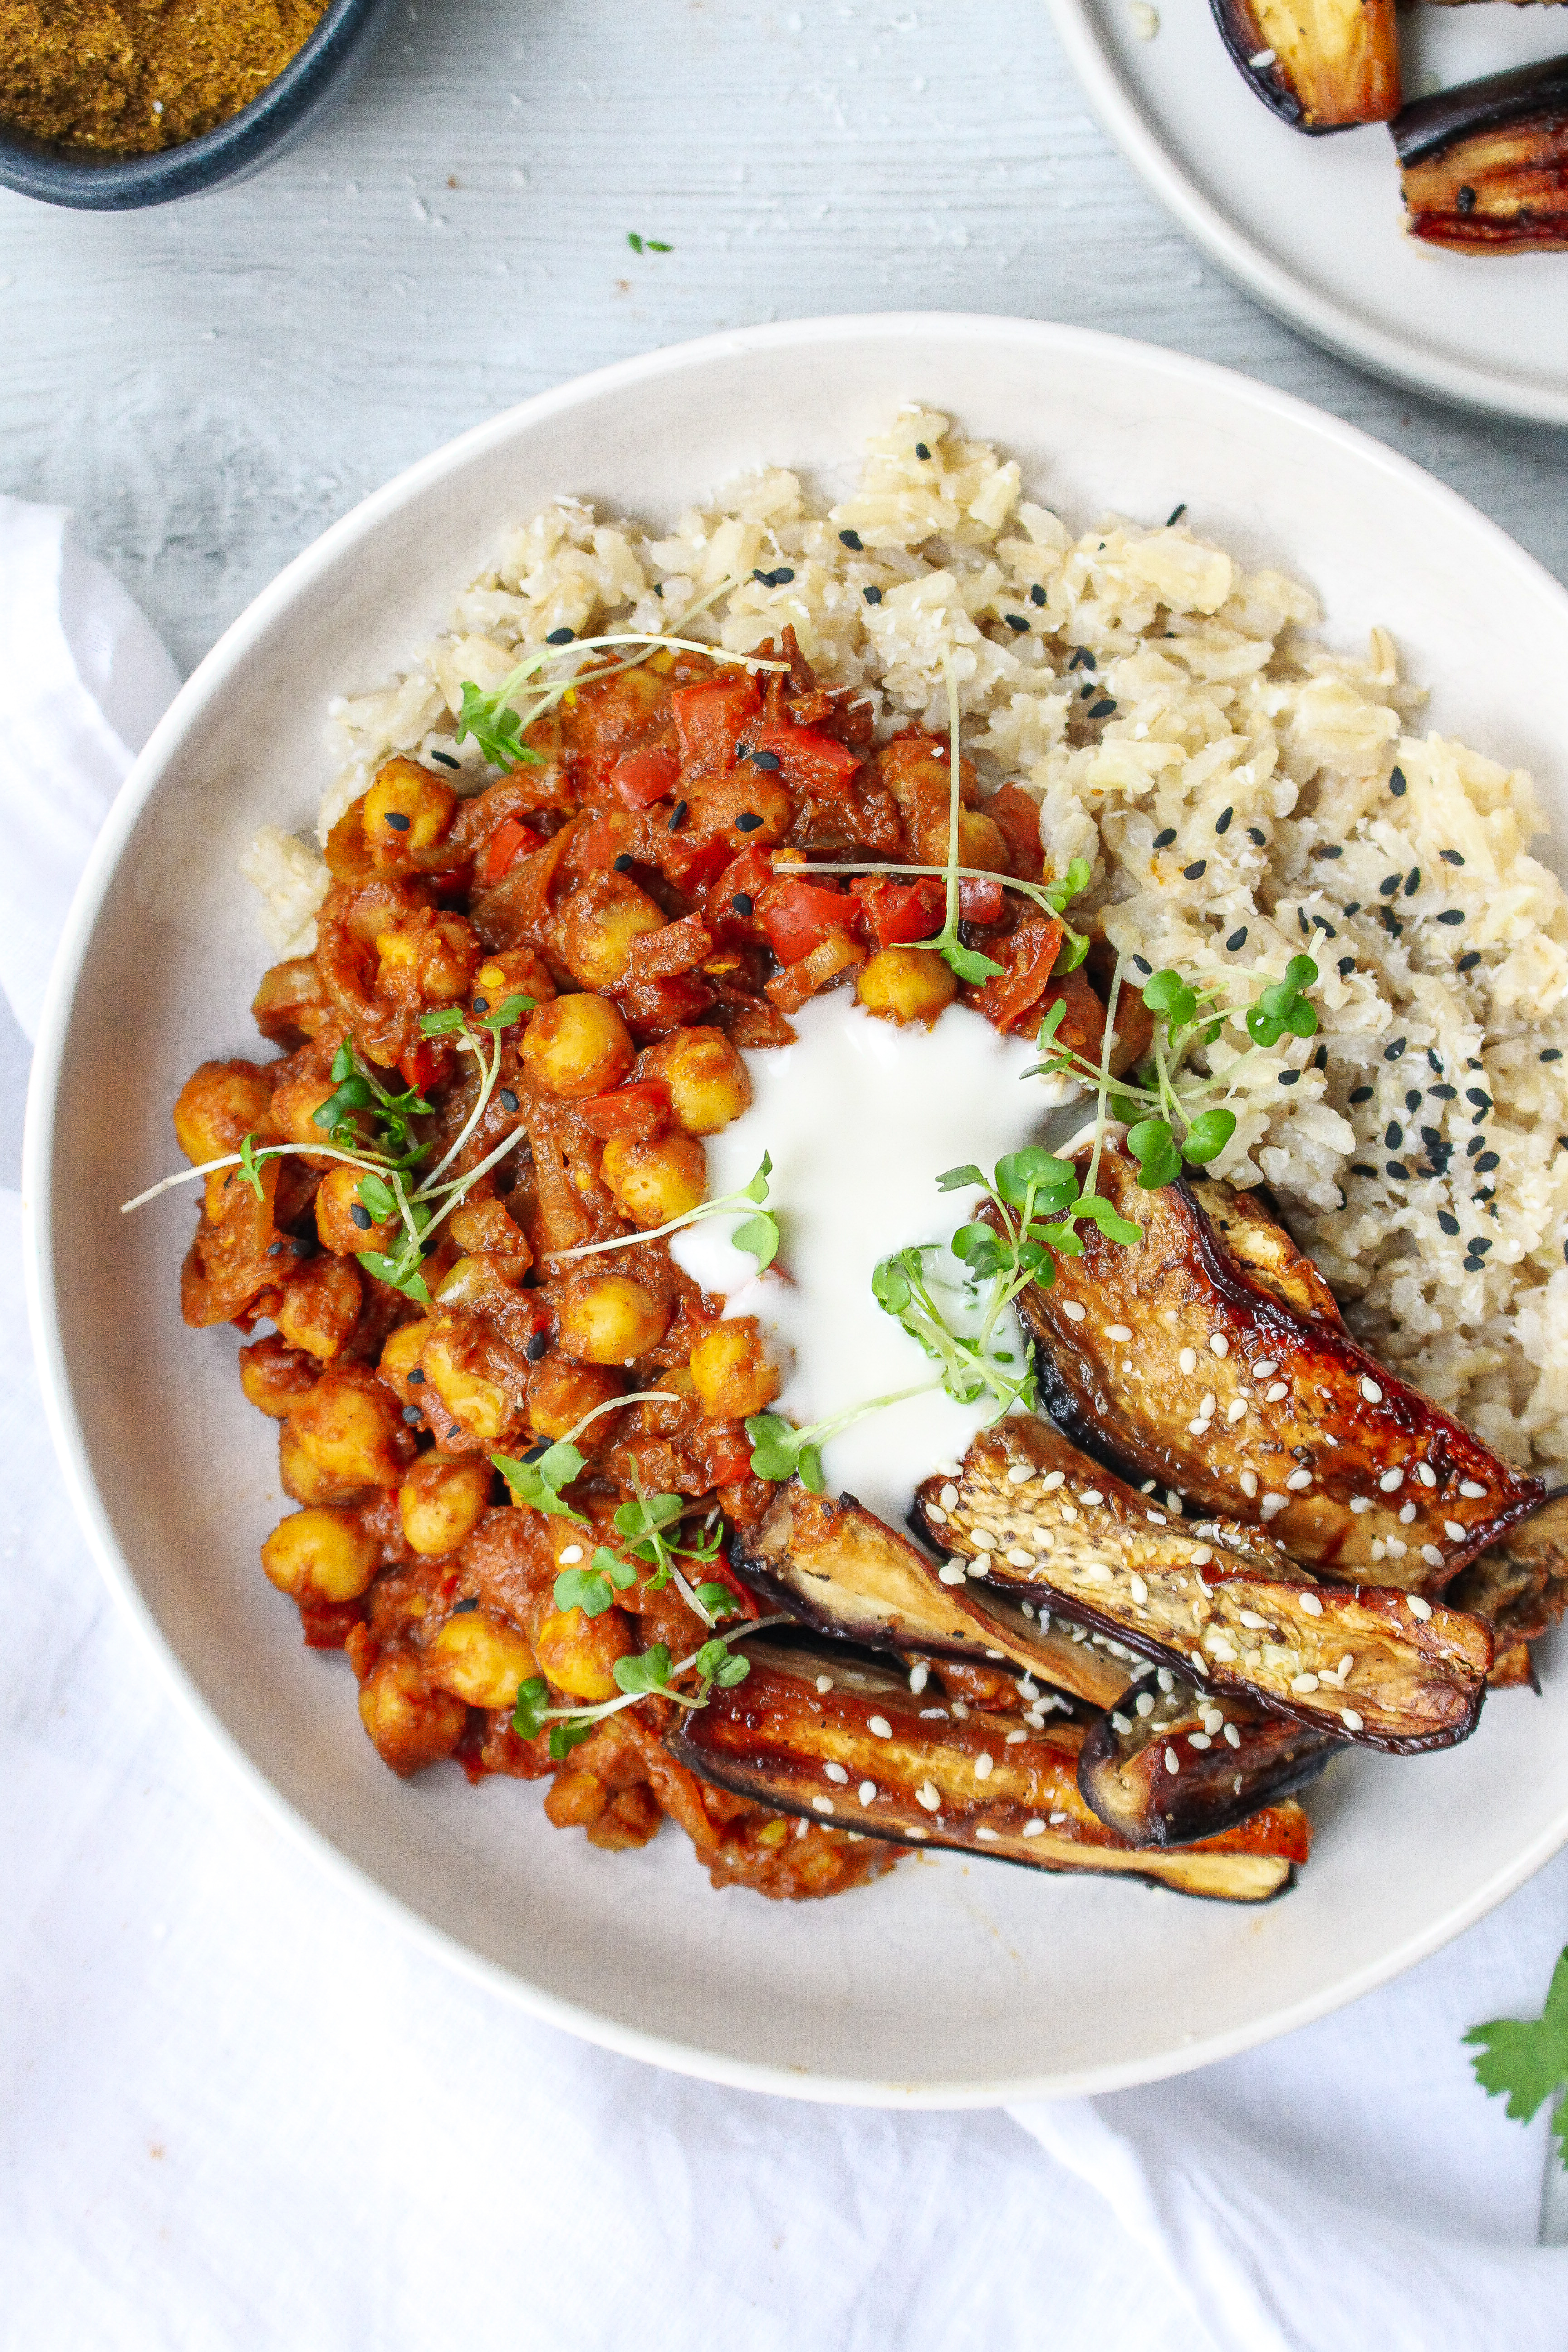 Sticky Asian Aubergine with Coconut Rice and Curried Chickpeas